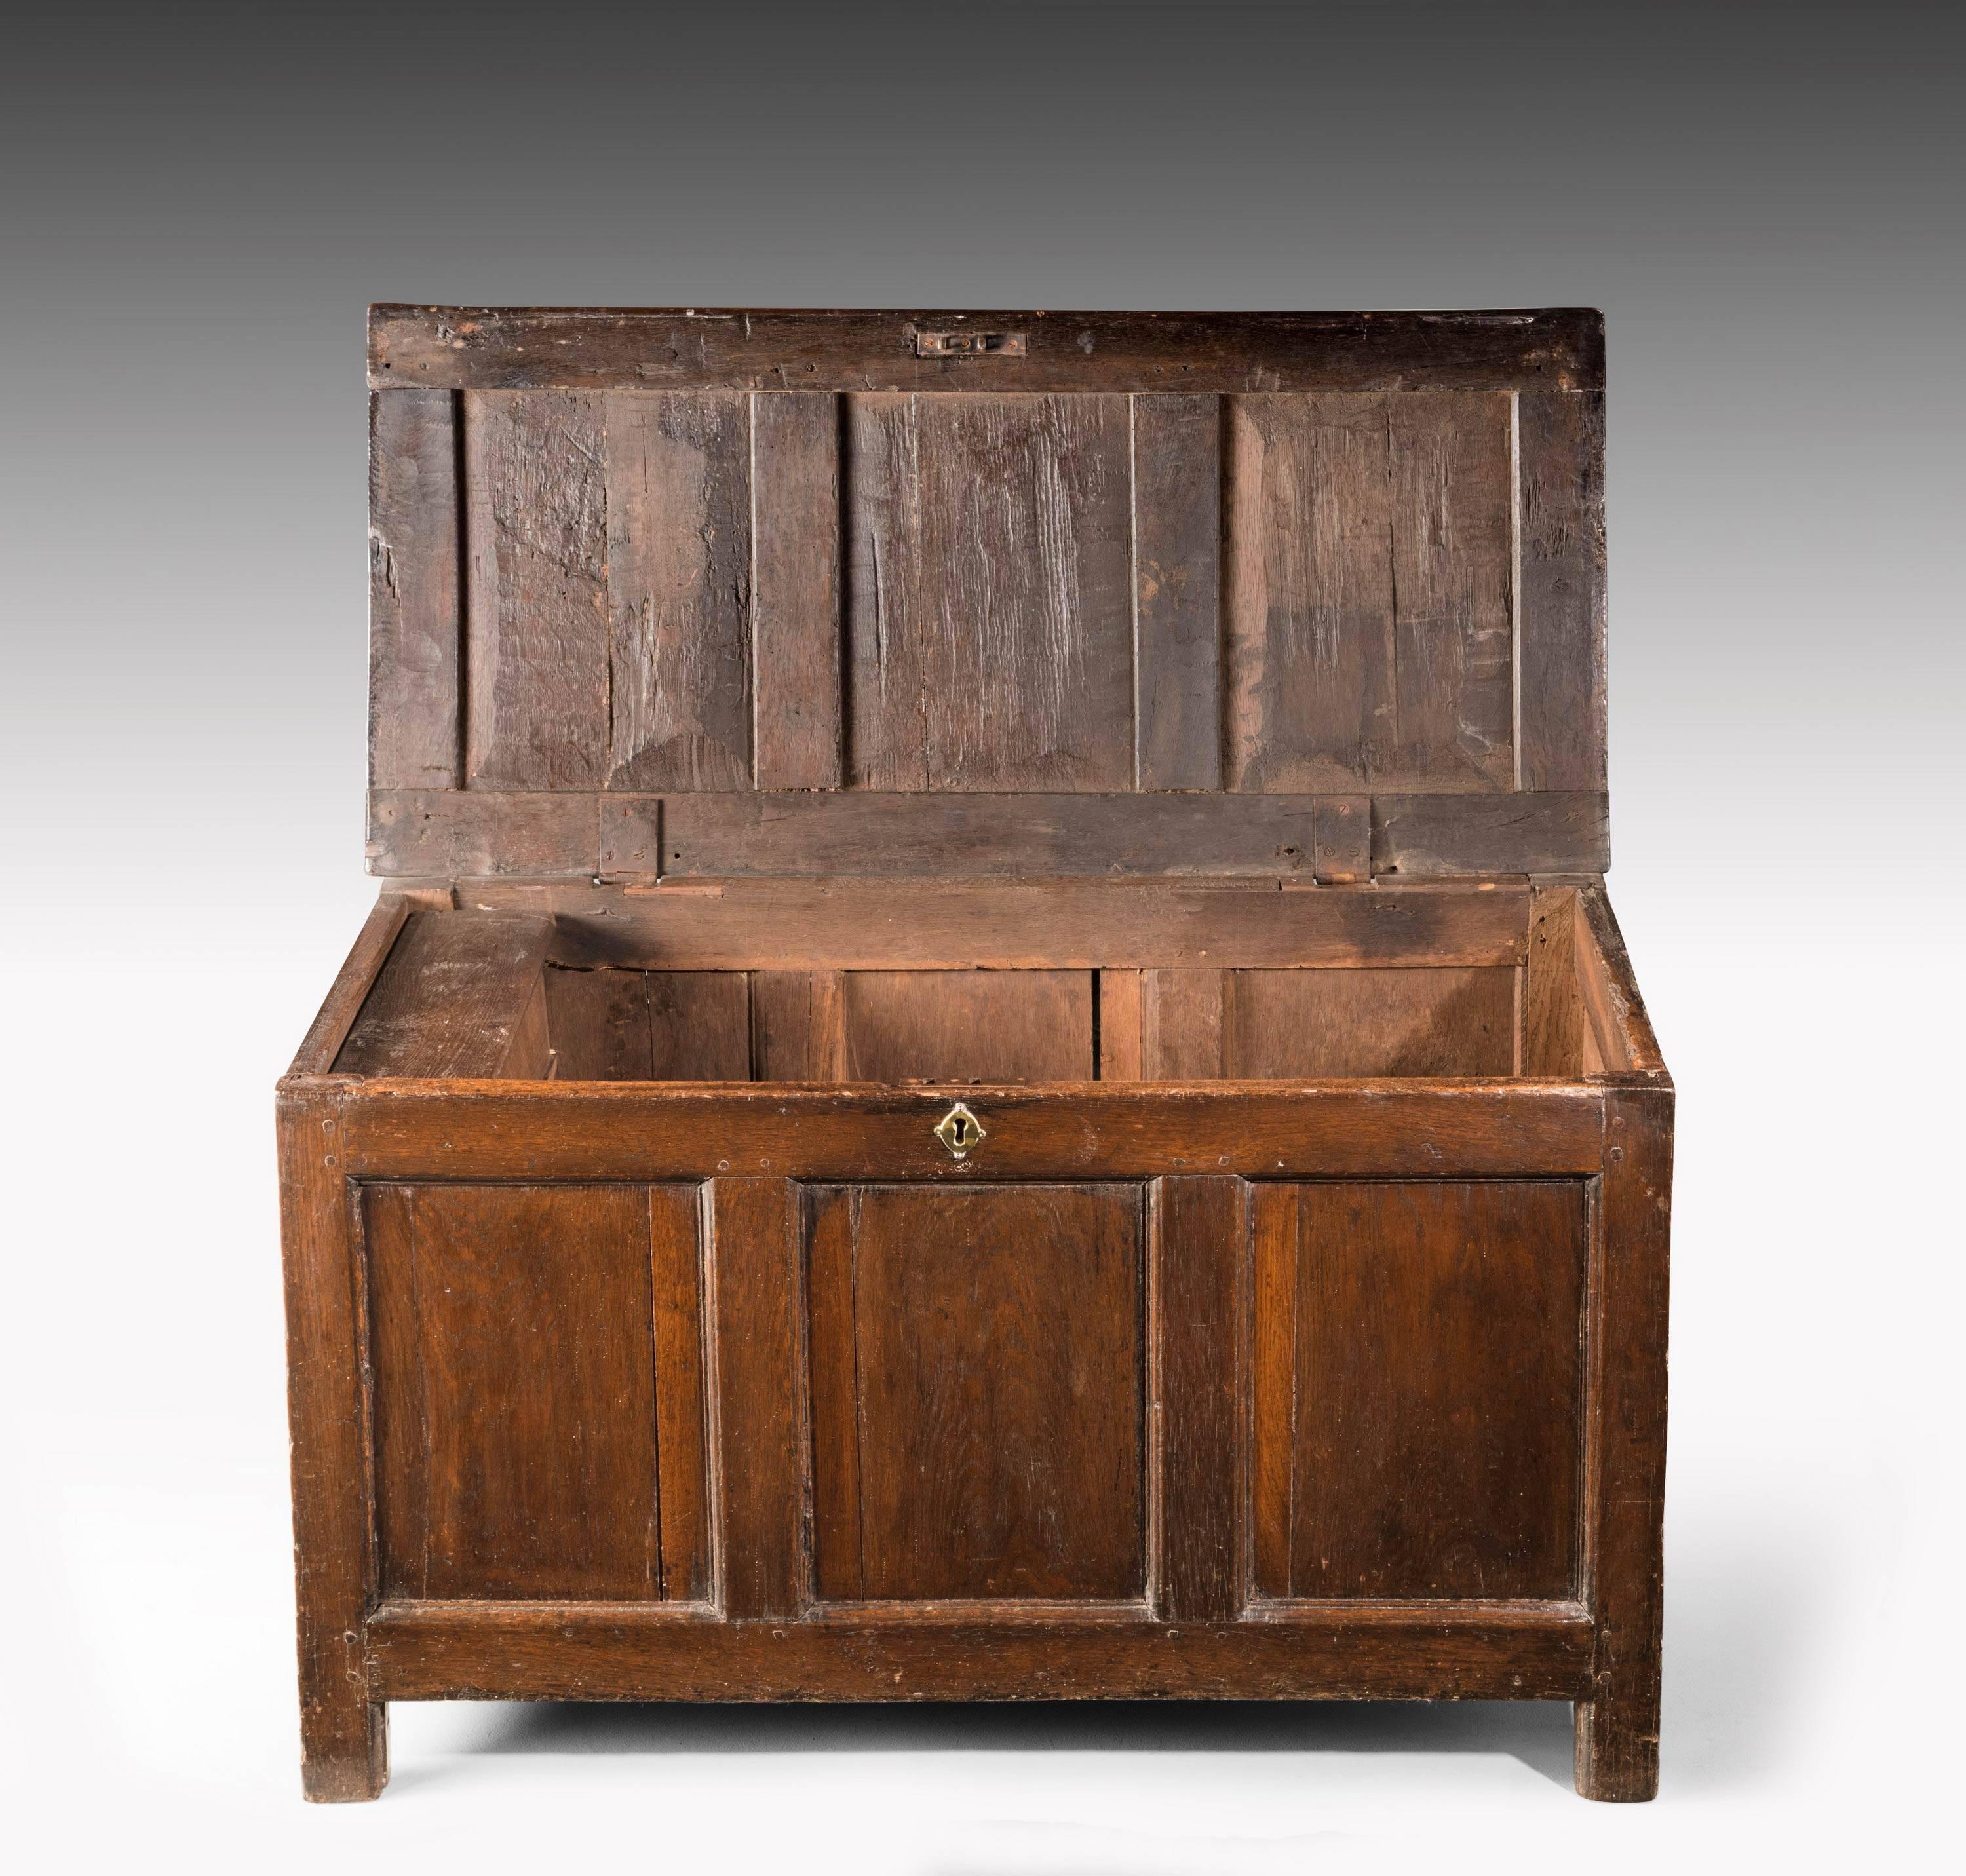 A good early 18th century oak panelled coffer/kist . The top compartment opening to reveal a candle box. Excellent overall patina and colour

N

A Kist ( also called Coffer or Chest ) is one of the oldest forms of furniture. It is typically a